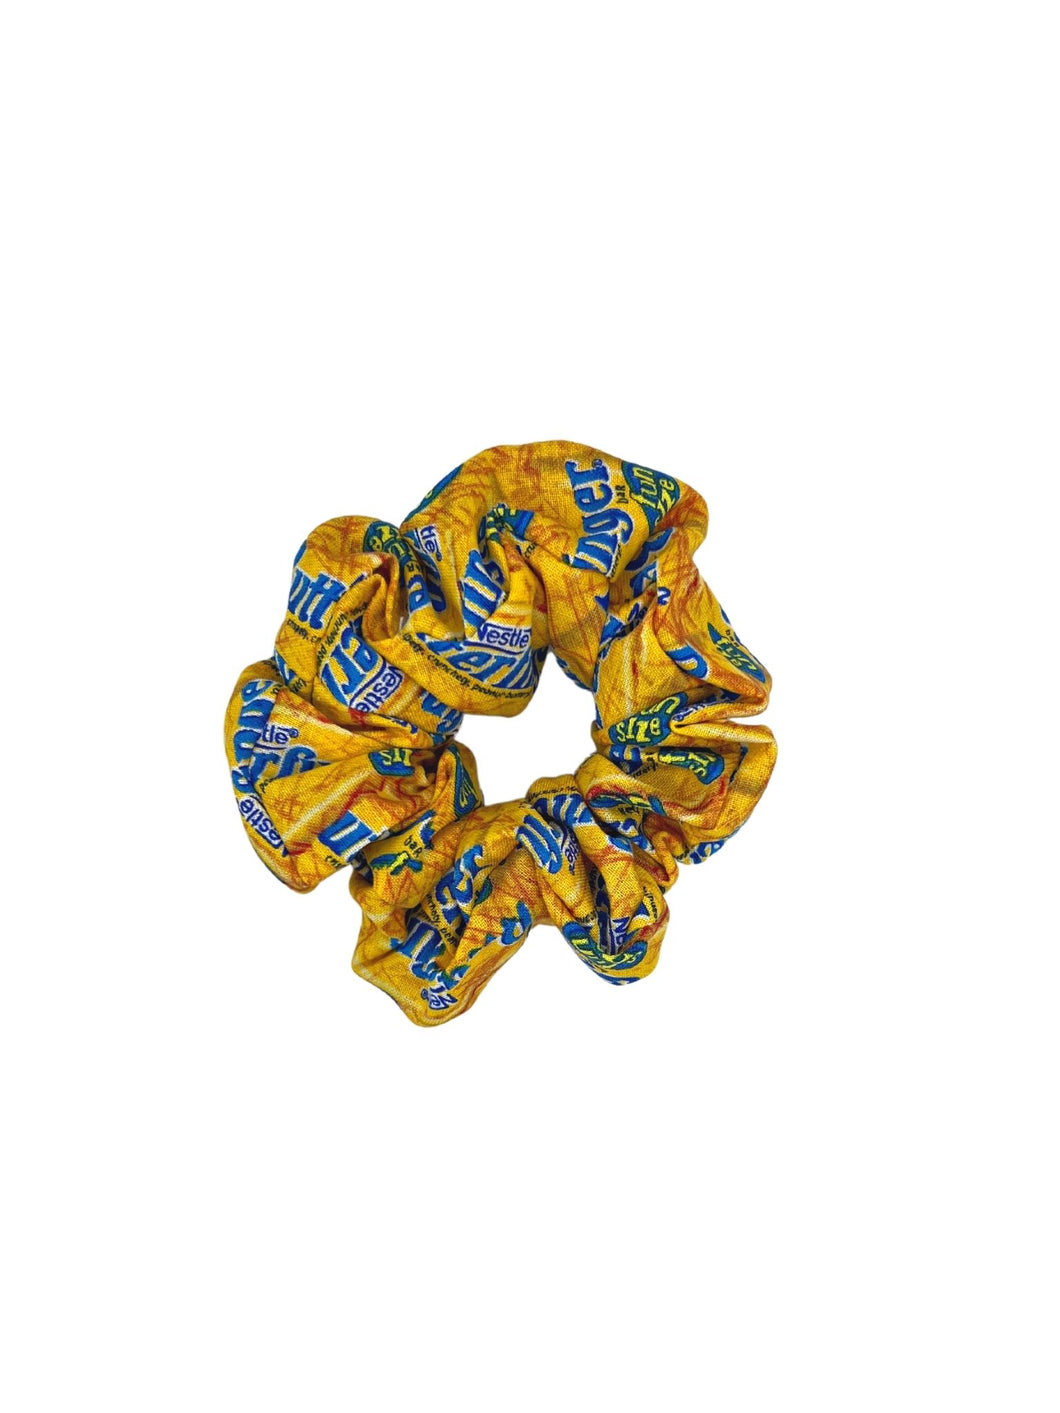 A scrunchie made with fabric featuring Butterfinger chocolate bars on a yellow gold background, made with cotton fabric.